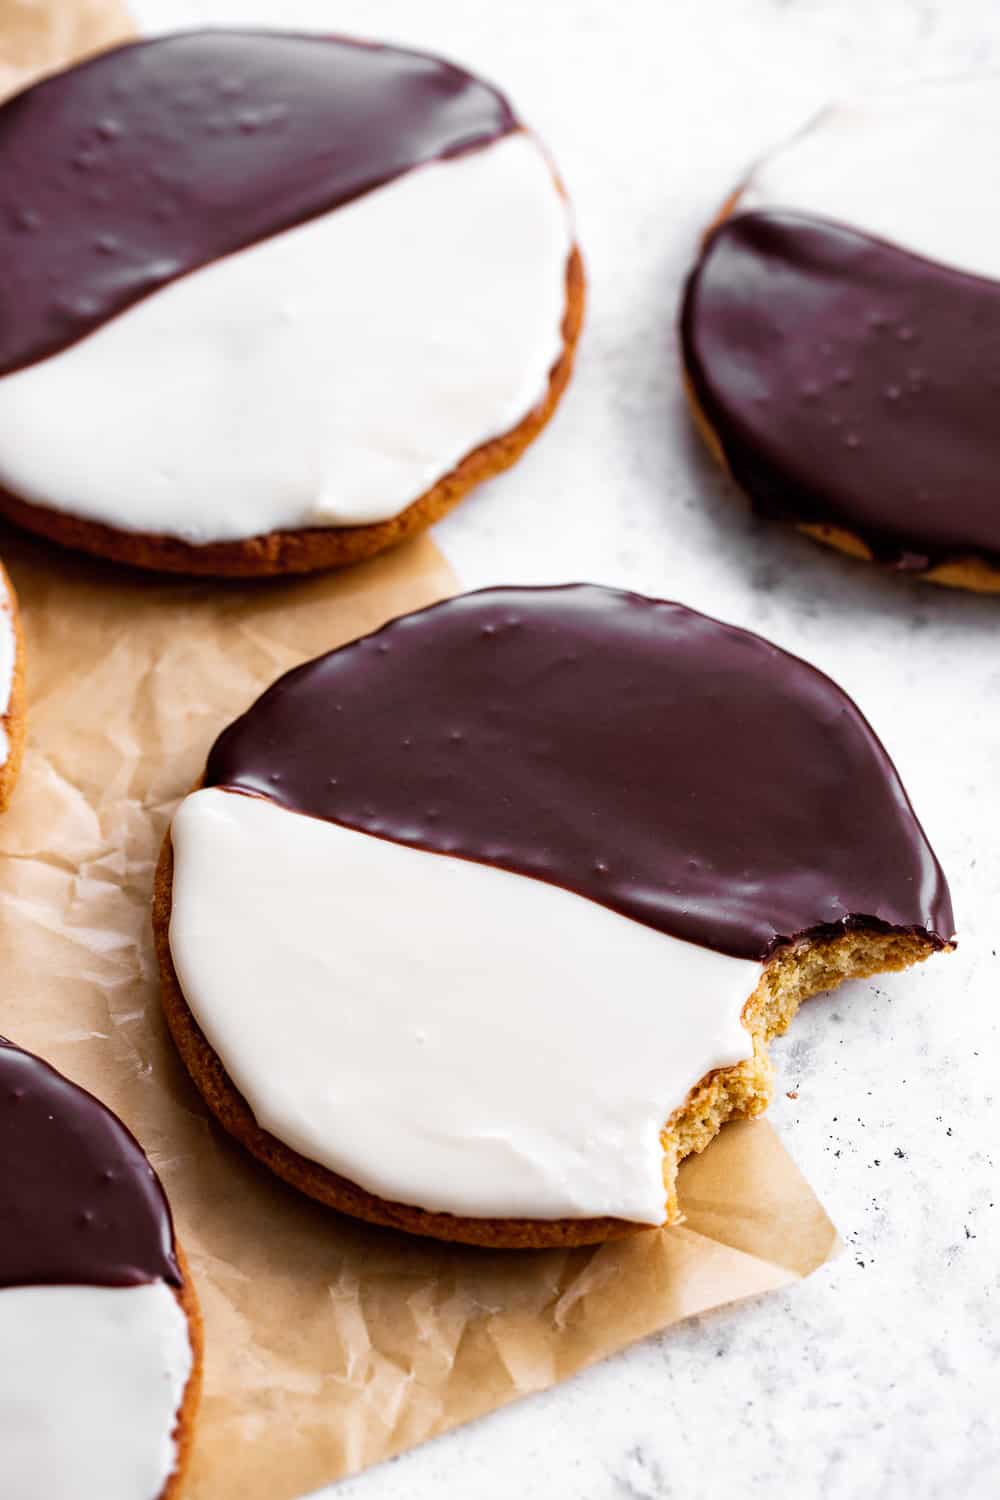 These homemade Black and White Cookies taste just like everyone's favorite New York City style bakery cookies - so much so that you'd never guess they're grain free!  This gluten free and grain free cookie recipe has dairy free and paleo options so everyone can enjoy these classic cookies at home!  #paleobaking #glutenfree #grainfree #paleo #cleaneating #glutenfreebaking #healthybaking